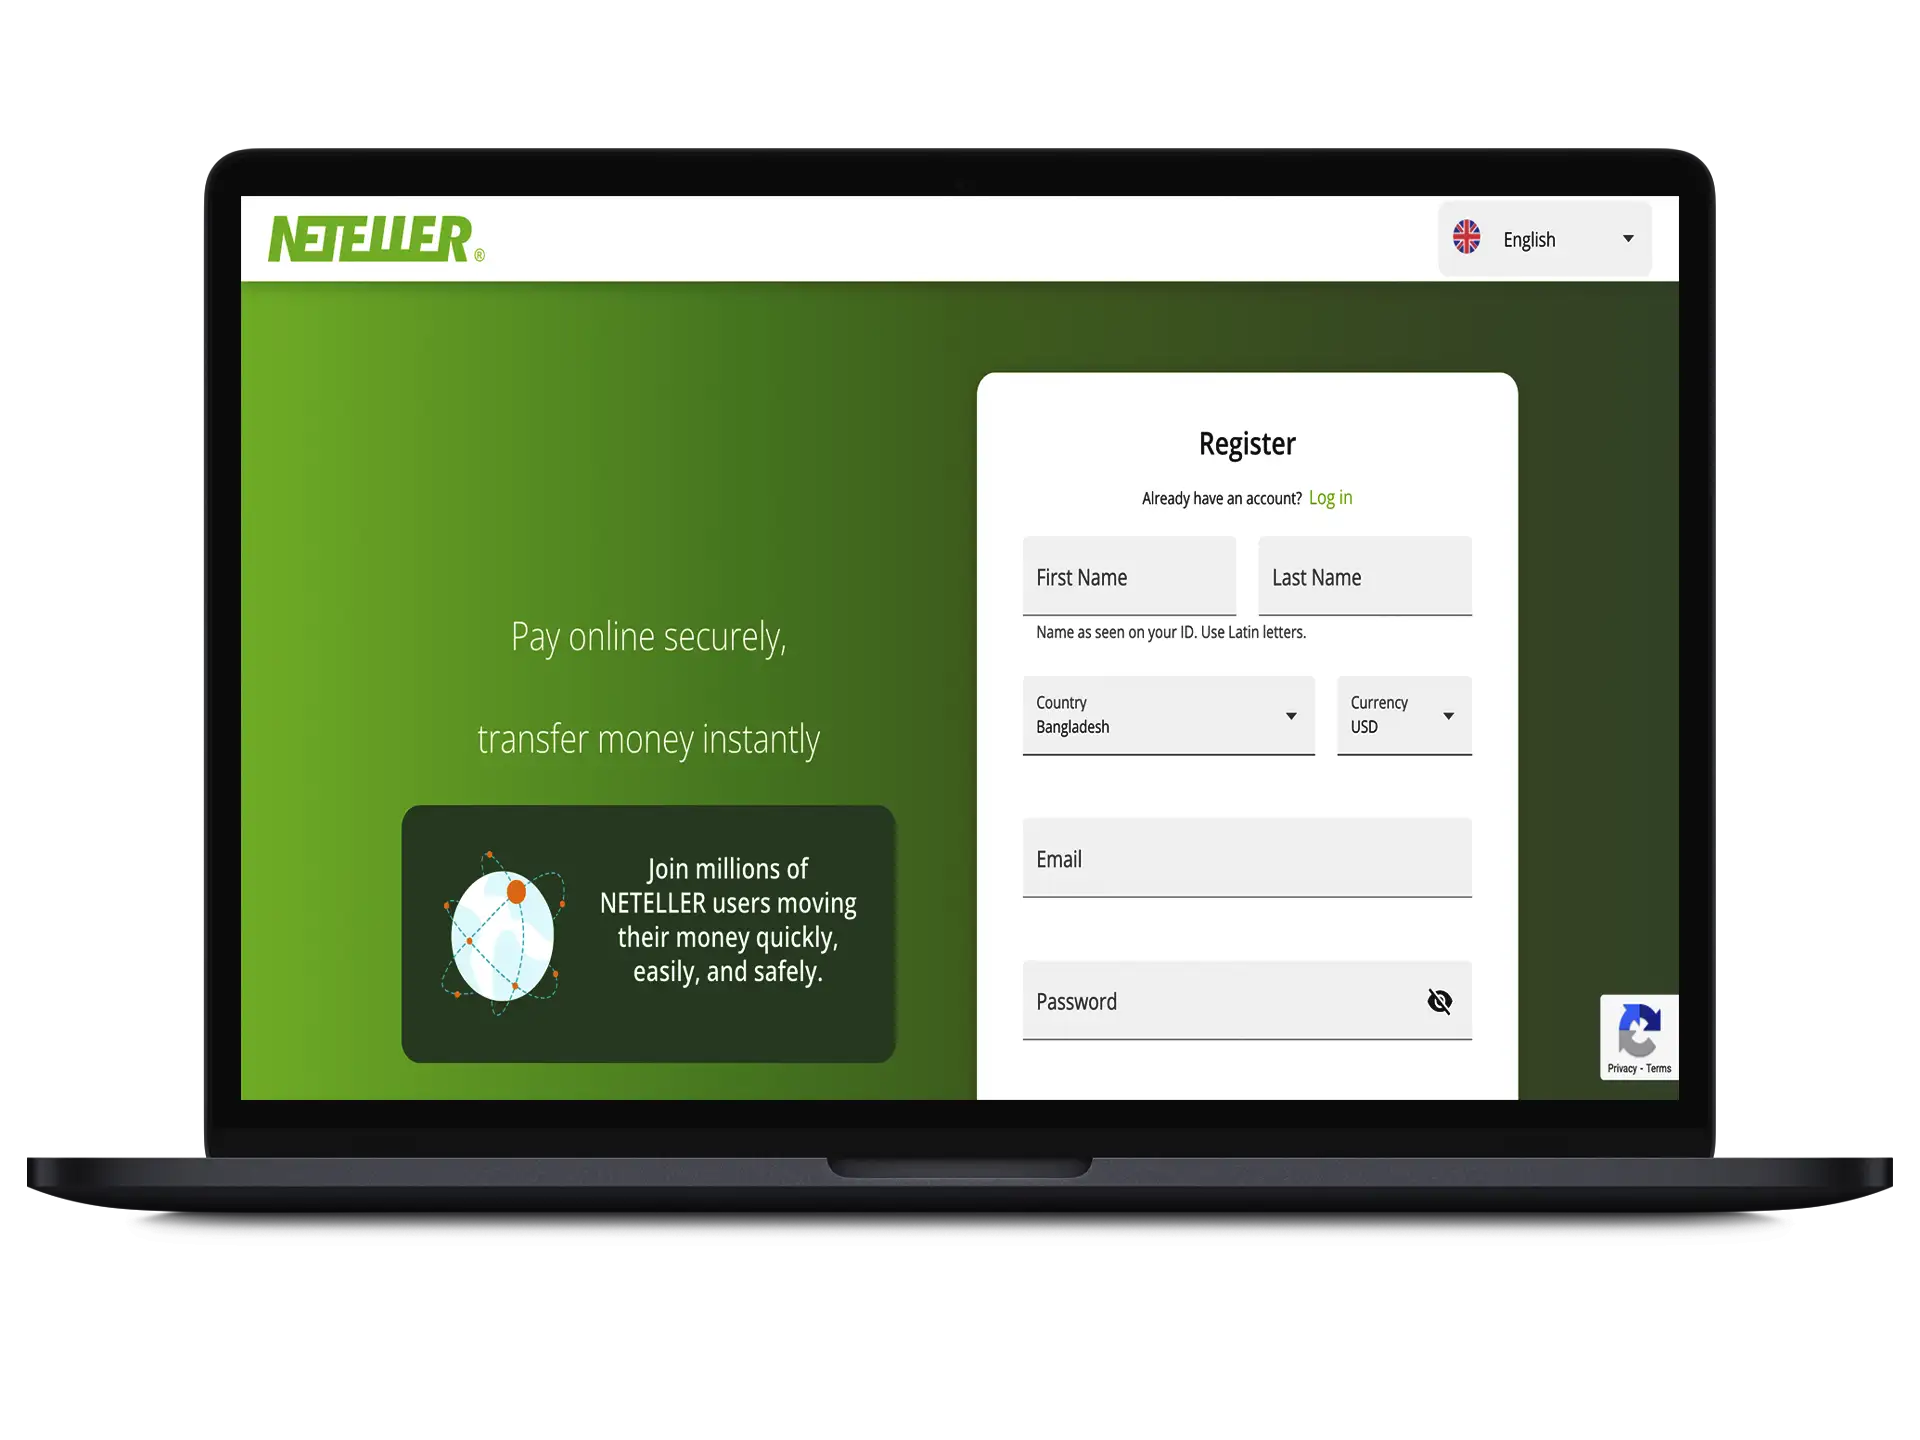 Following our guide, you will register on the Neteller website.